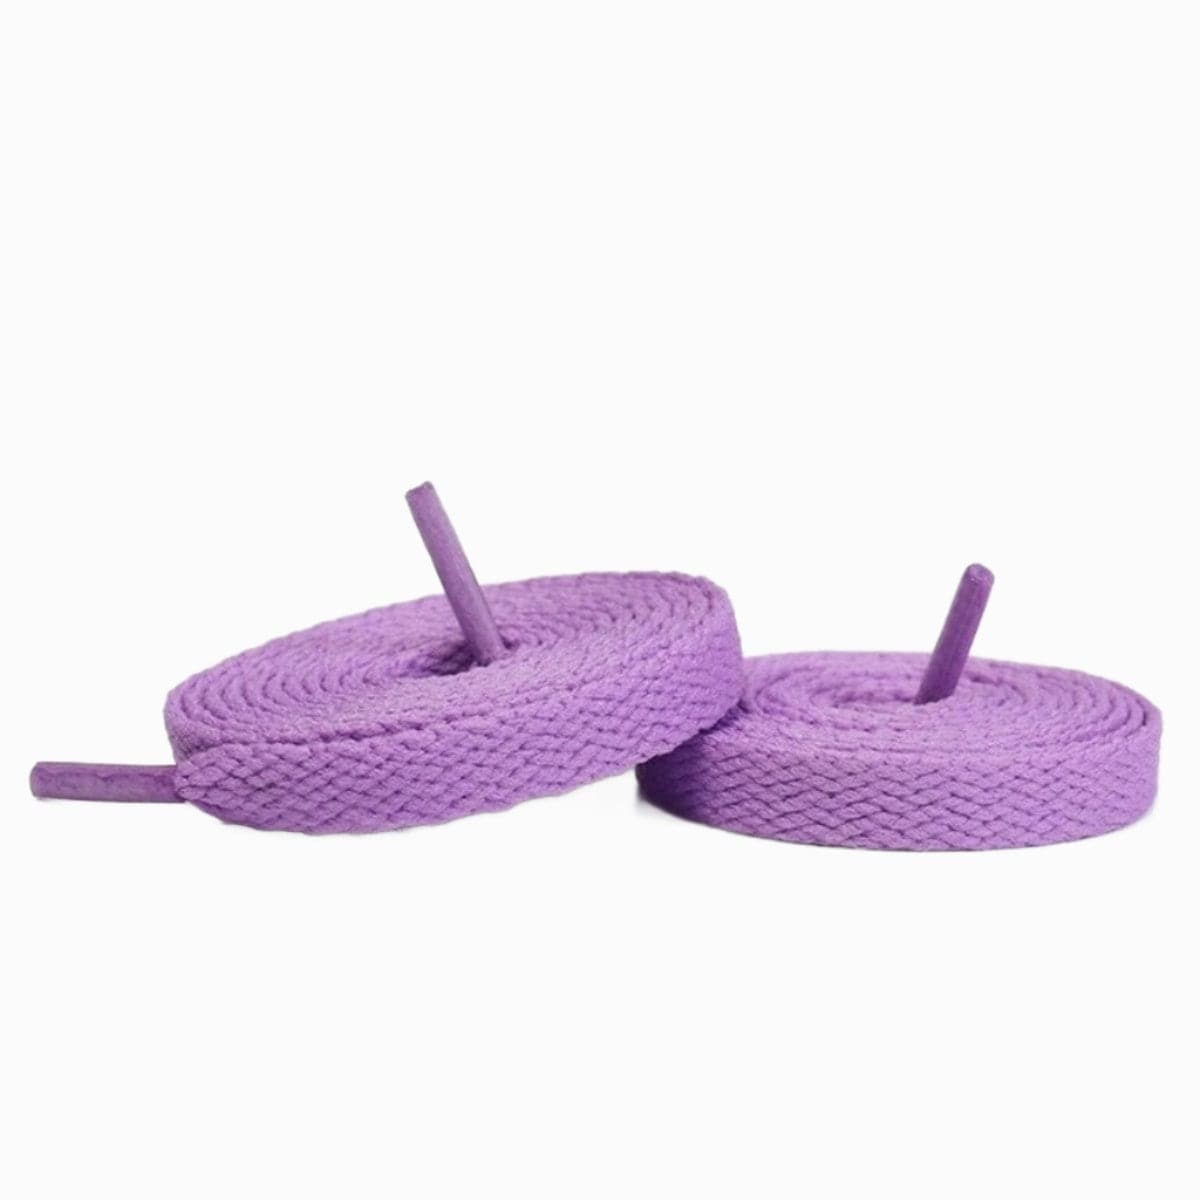 Pastel Purple Replacement Shoe Laces for Adidas Handball Spezial Sneakers by Kicks Shoelaces